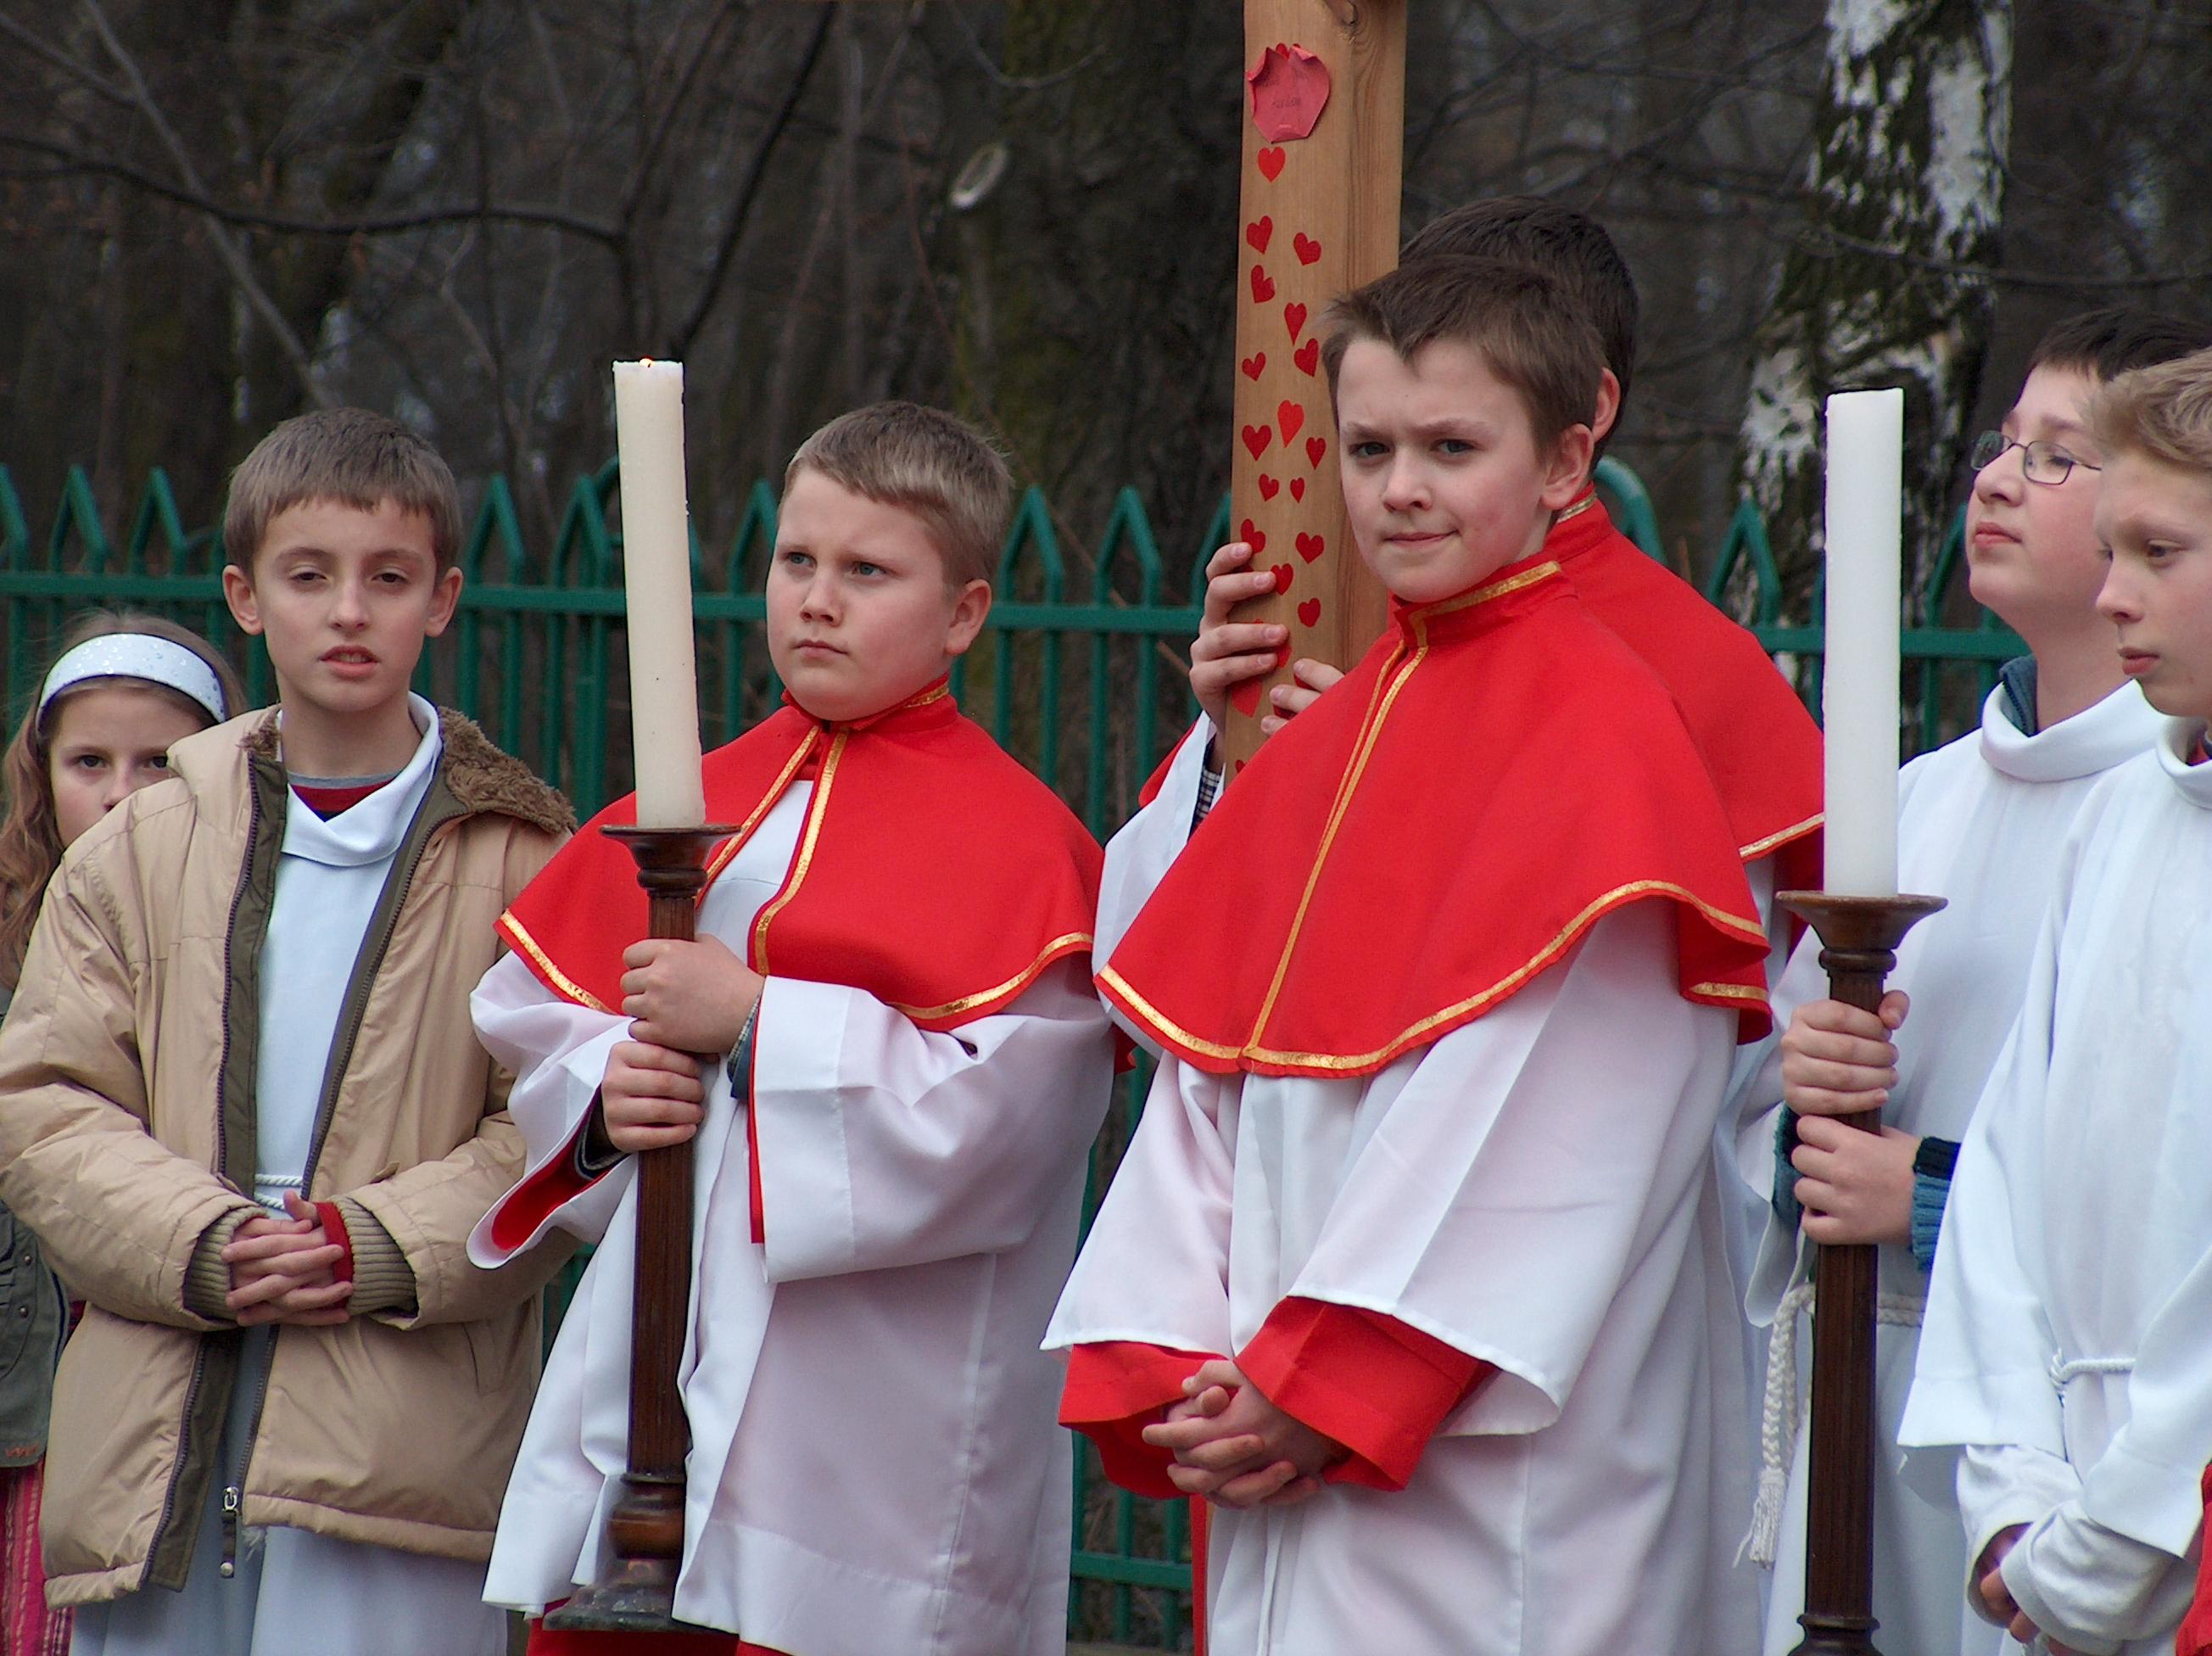 A group of altar servers from Ołtarzew